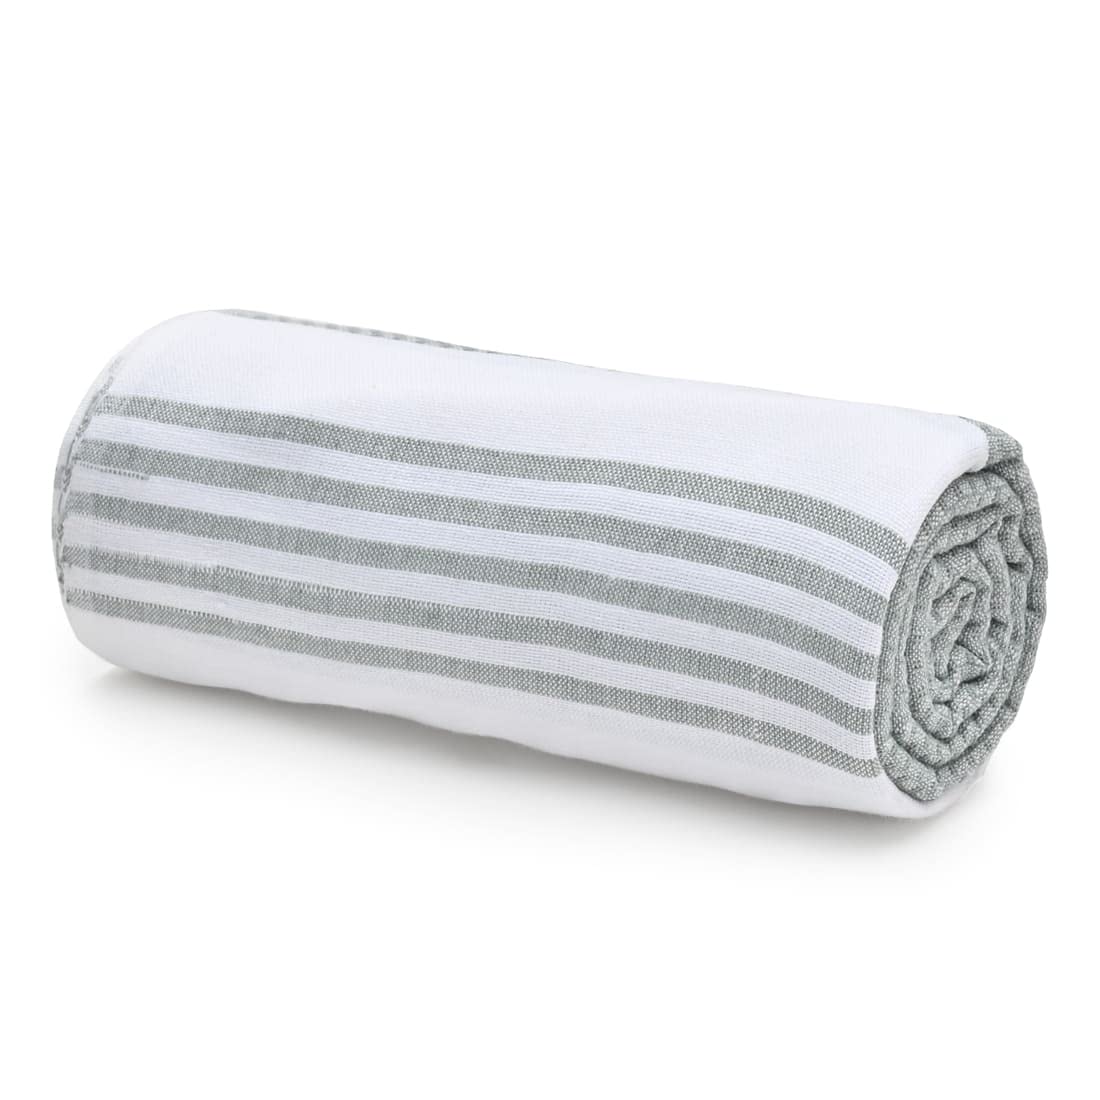 100% Cotton Turkish Bath Towel | Quick Drying Cotton Towel | Light Weight, Soft & Absorbent Turkish Towel (Pack of 1, Grey) (Pack of 1, Grey)